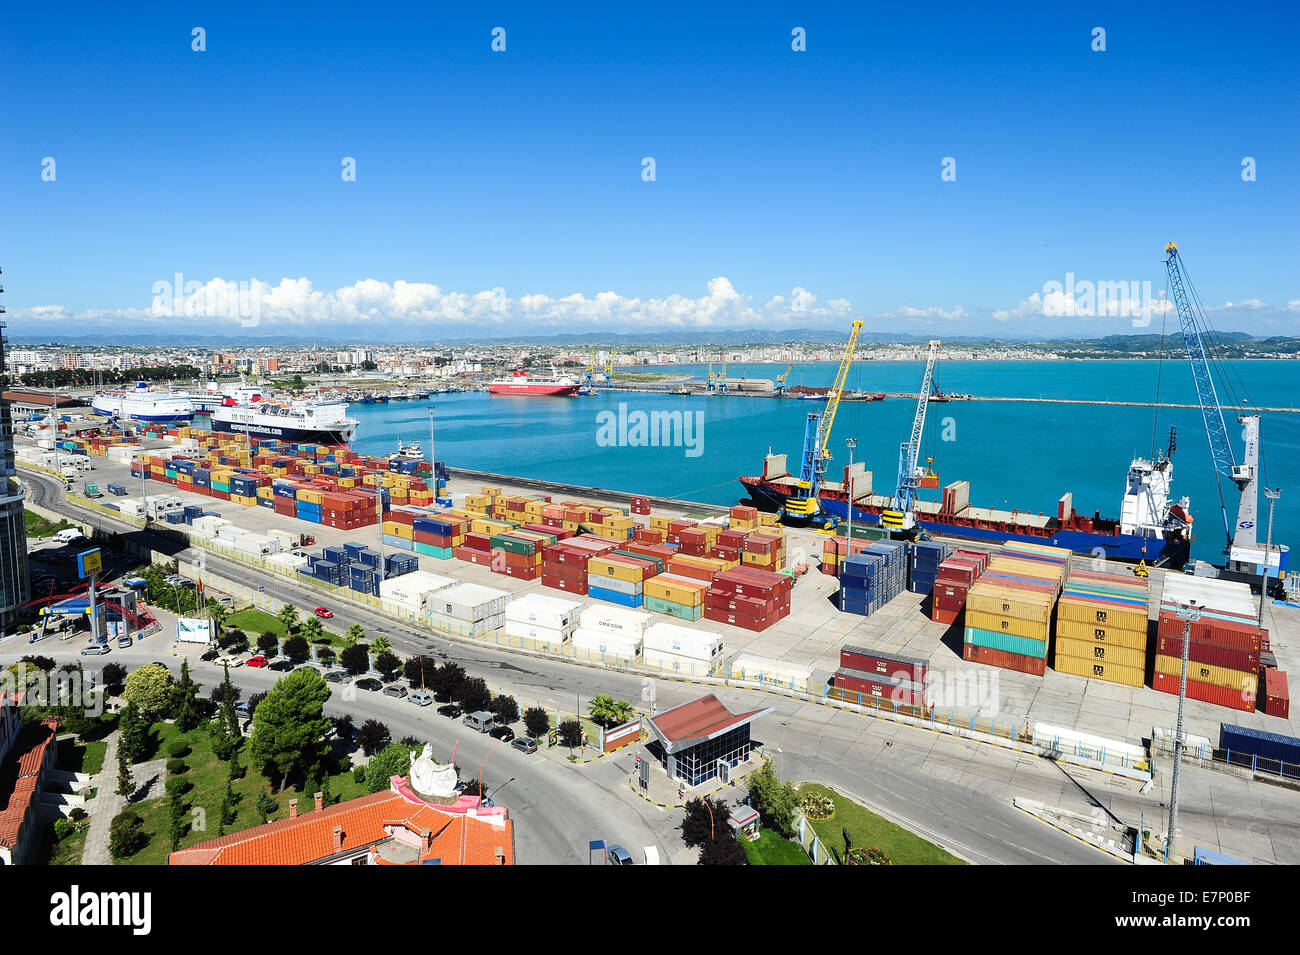 Albania, boat, building, business, cargo, carrier, coast, colour, colourful, commerce, commercial, container, crane, day, dock, Stock Photo